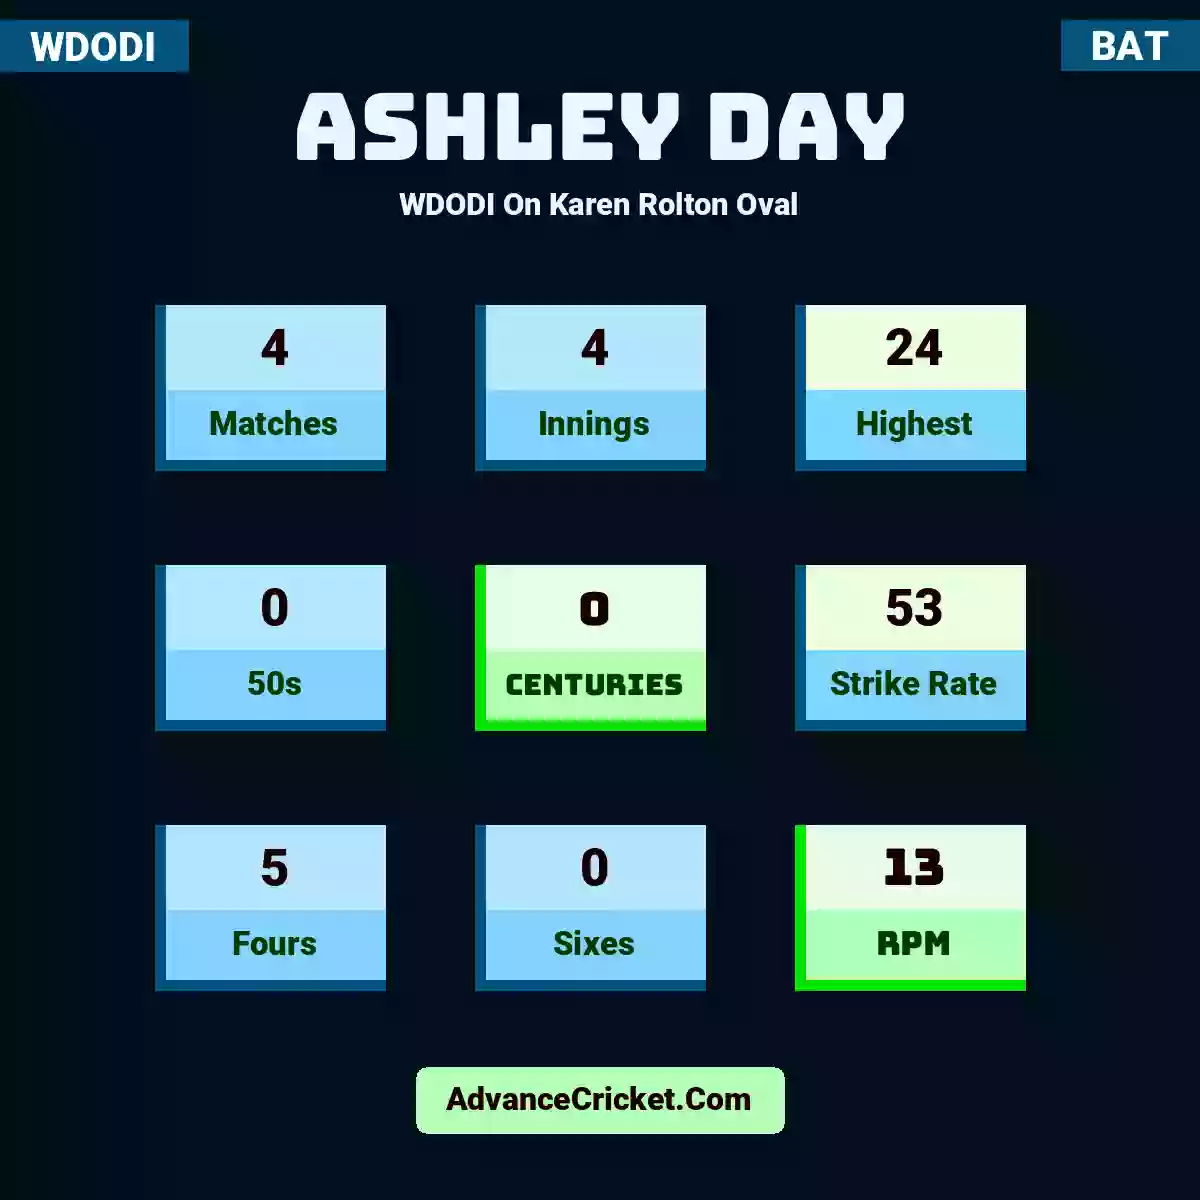 Ashley Day WDODI  On Karen Rolton Oval, Ashley Day played 4 matches, scored 24 runs as highest, 0 half-centuries, and 0 centuries, with a strike rate of 53. A.Day hit 5 fours and 0 sixes, with an RPM of 13.